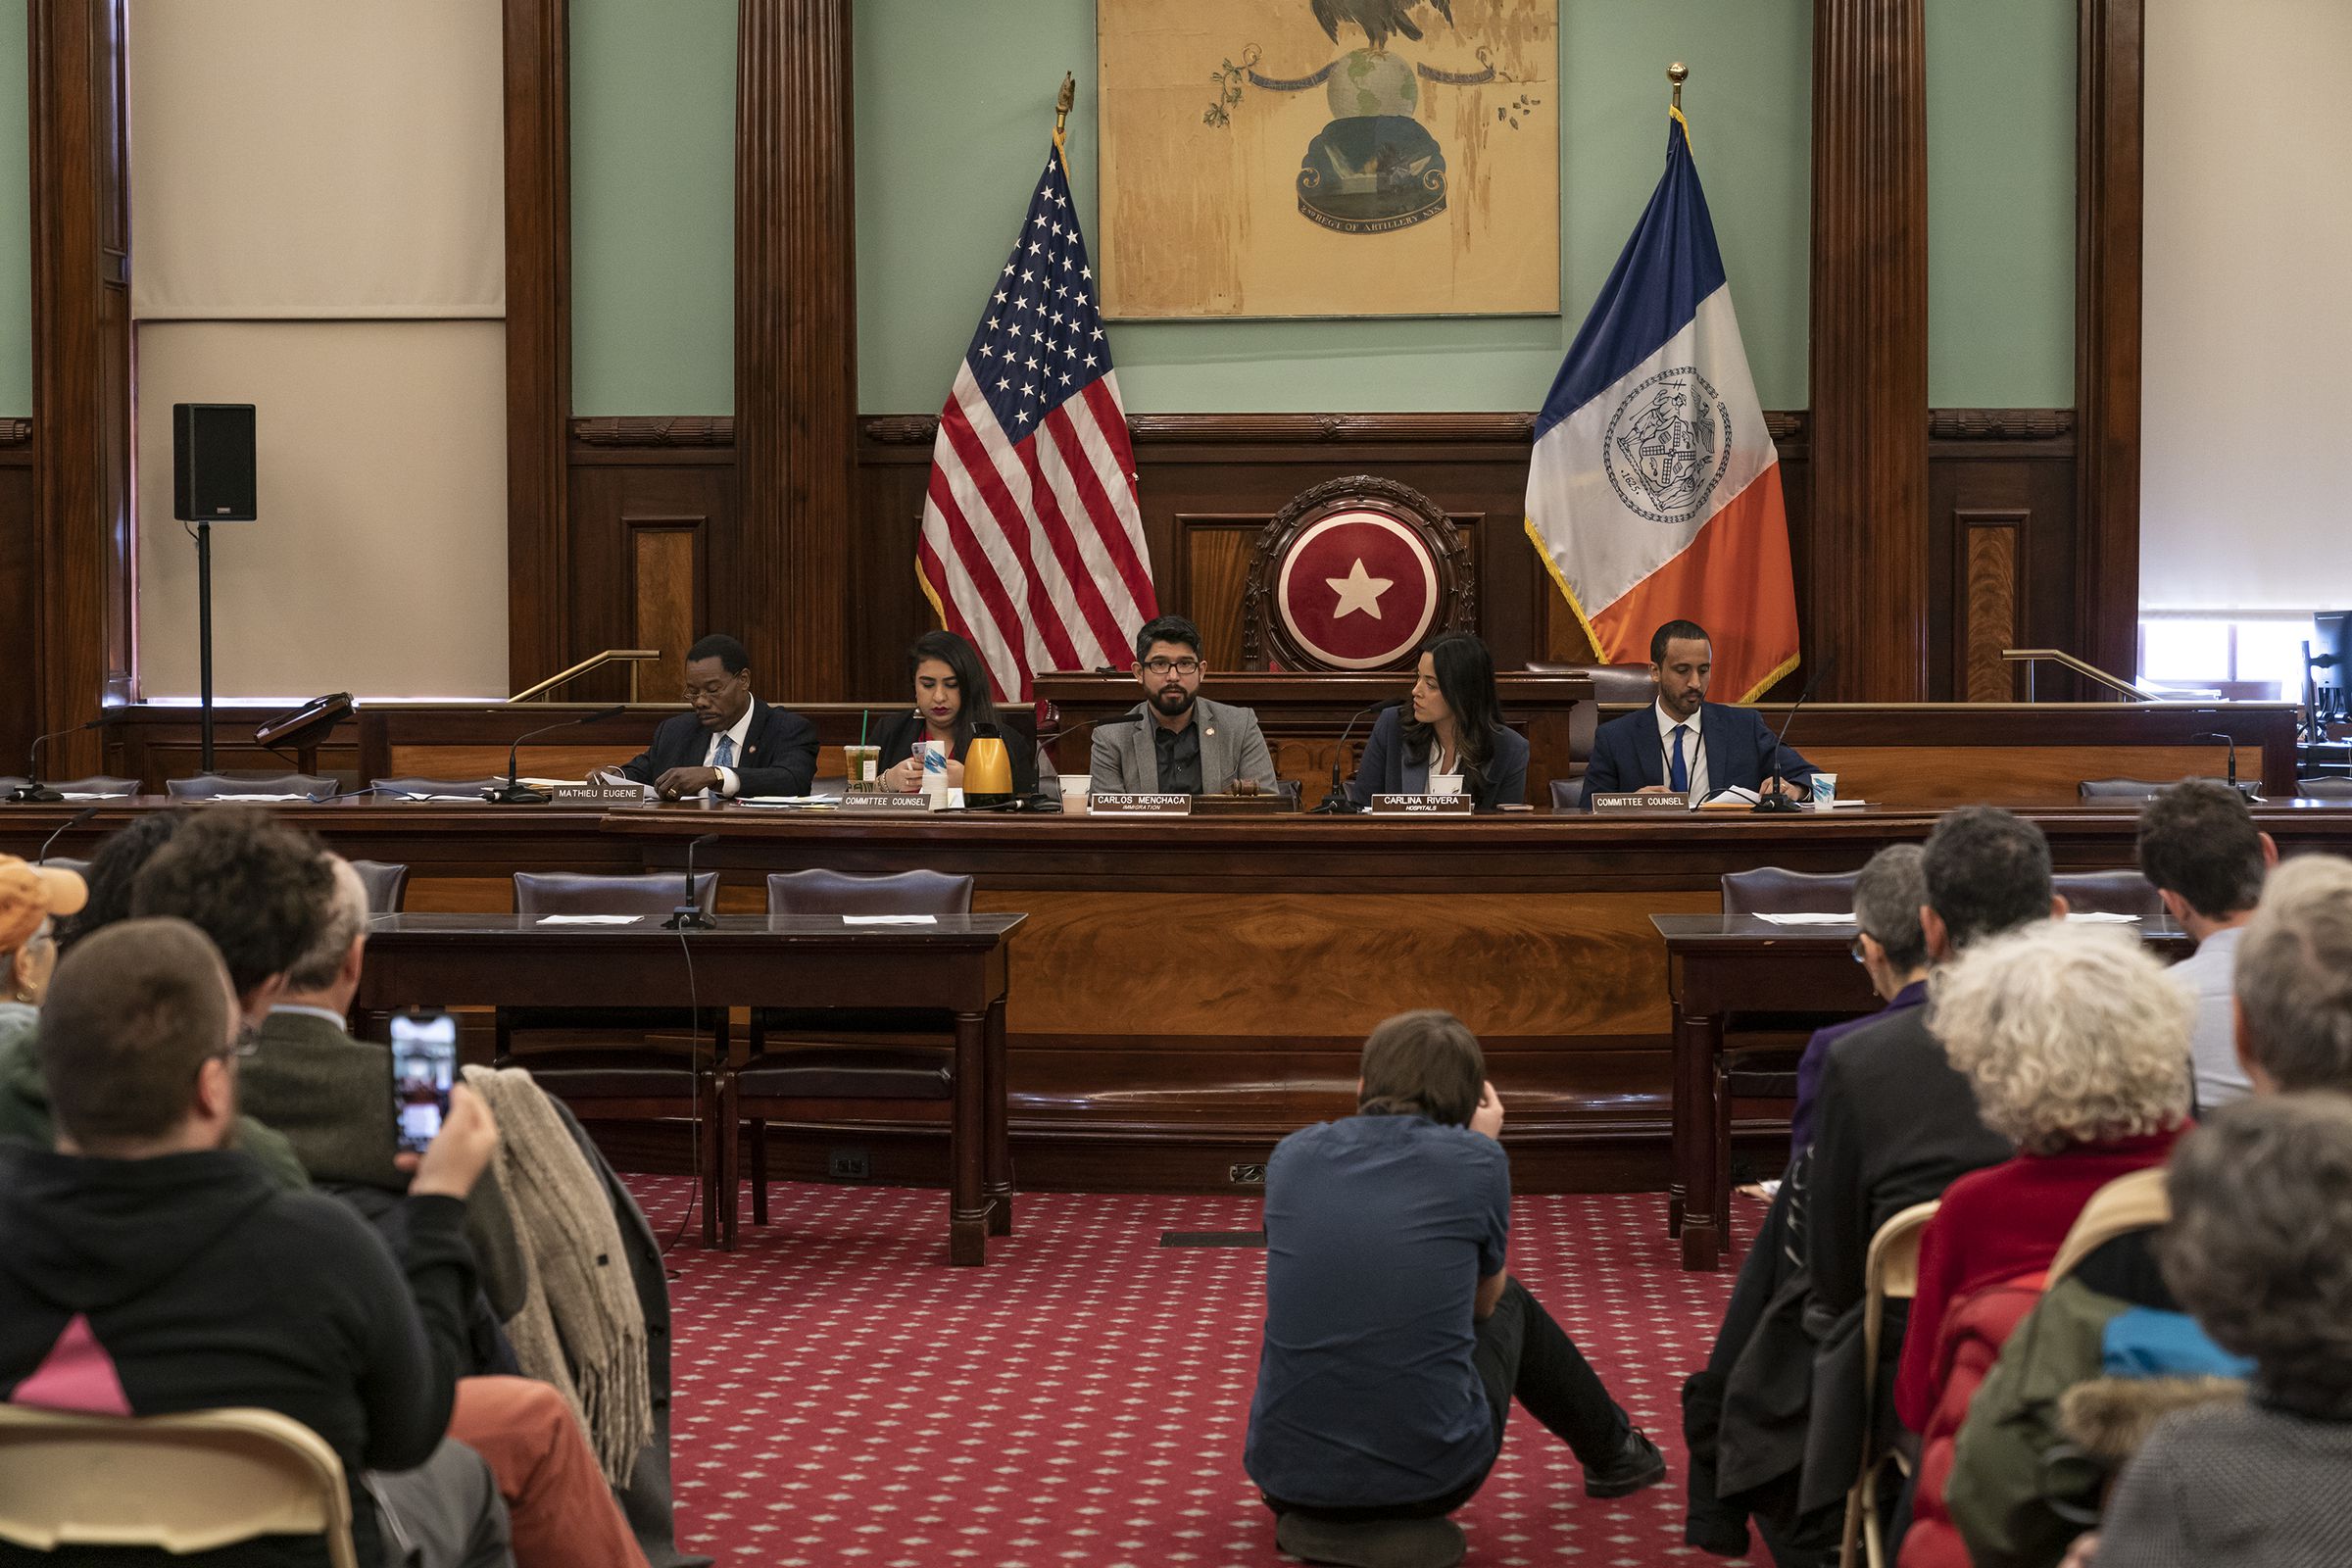 City Council hearing on ICE escalating immigration...